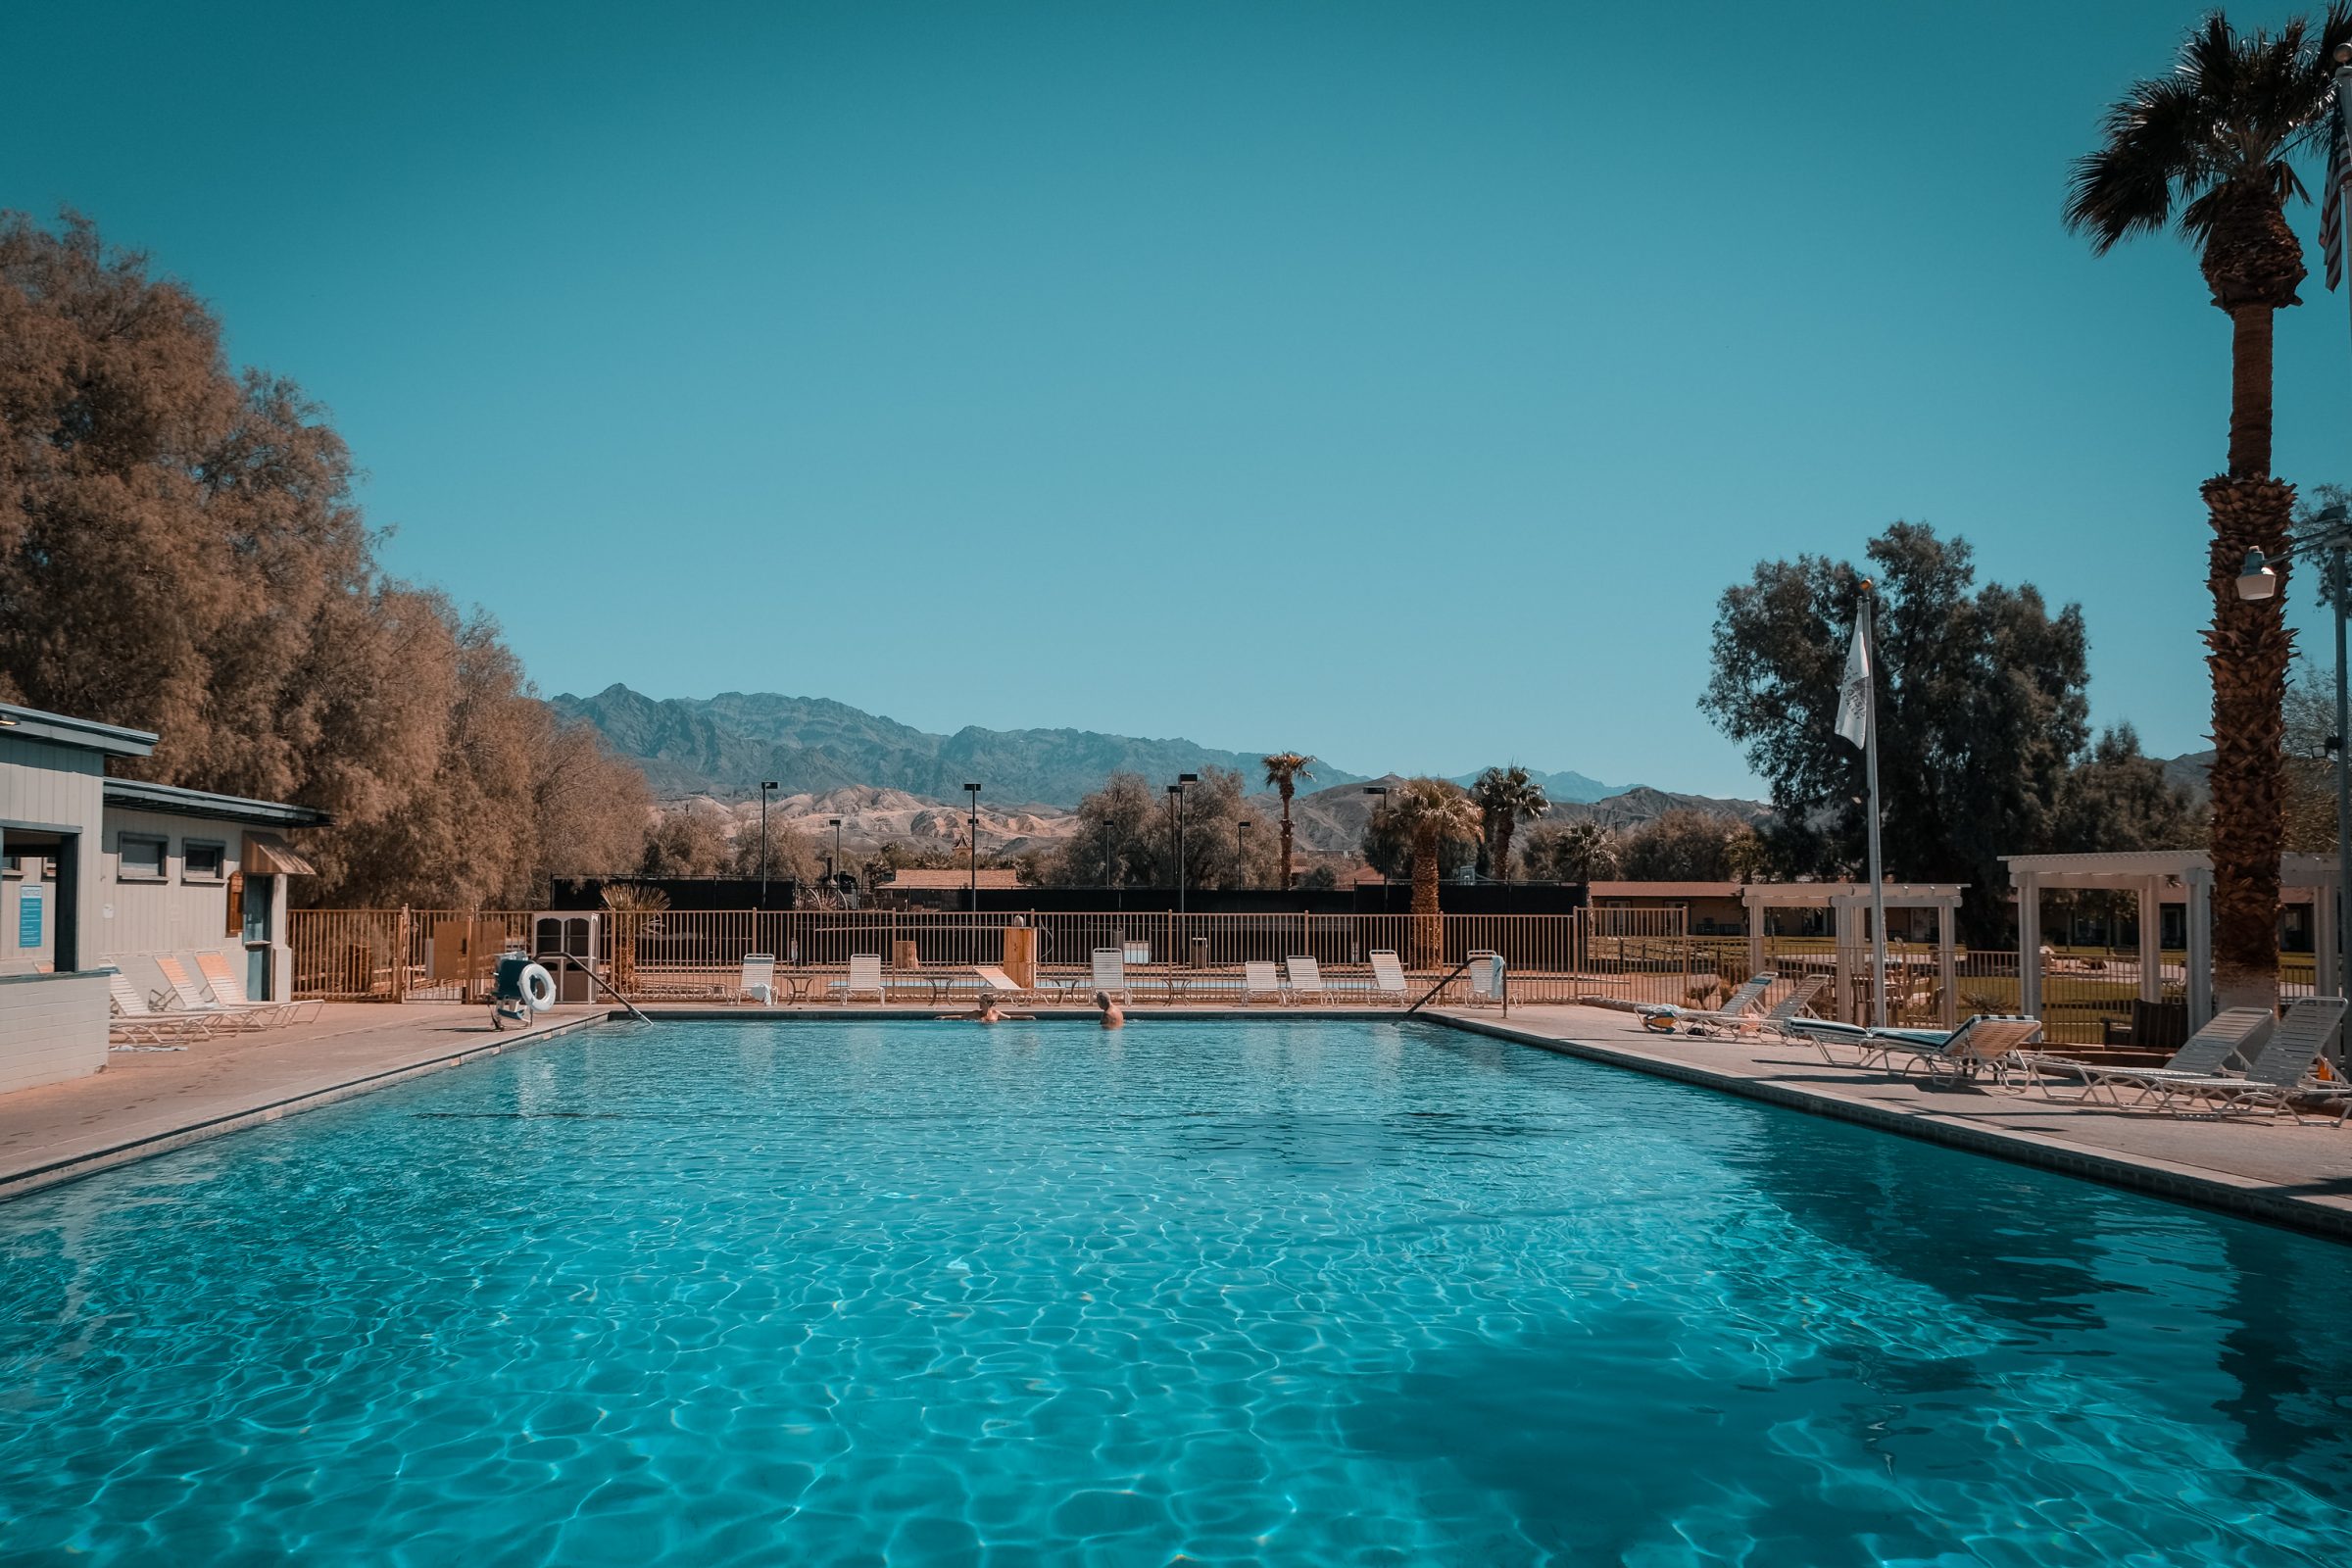 The Pool at The Ranch at Death Valley